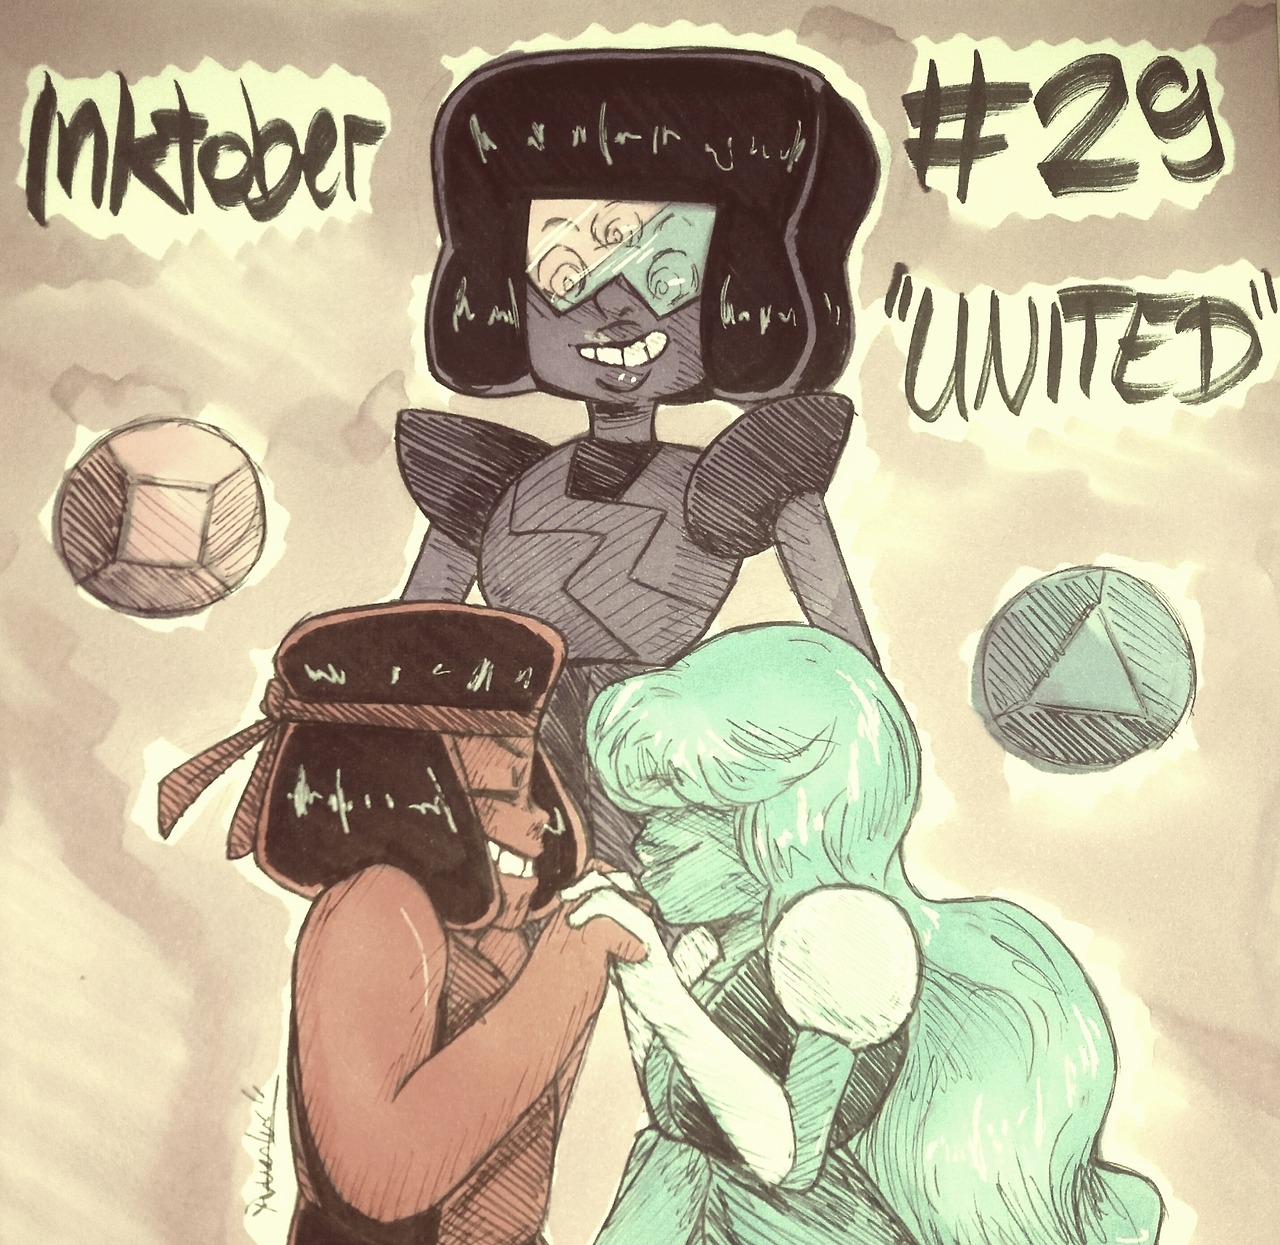 Inktober Day 29 “UNITED” aaand of course I drew square mom